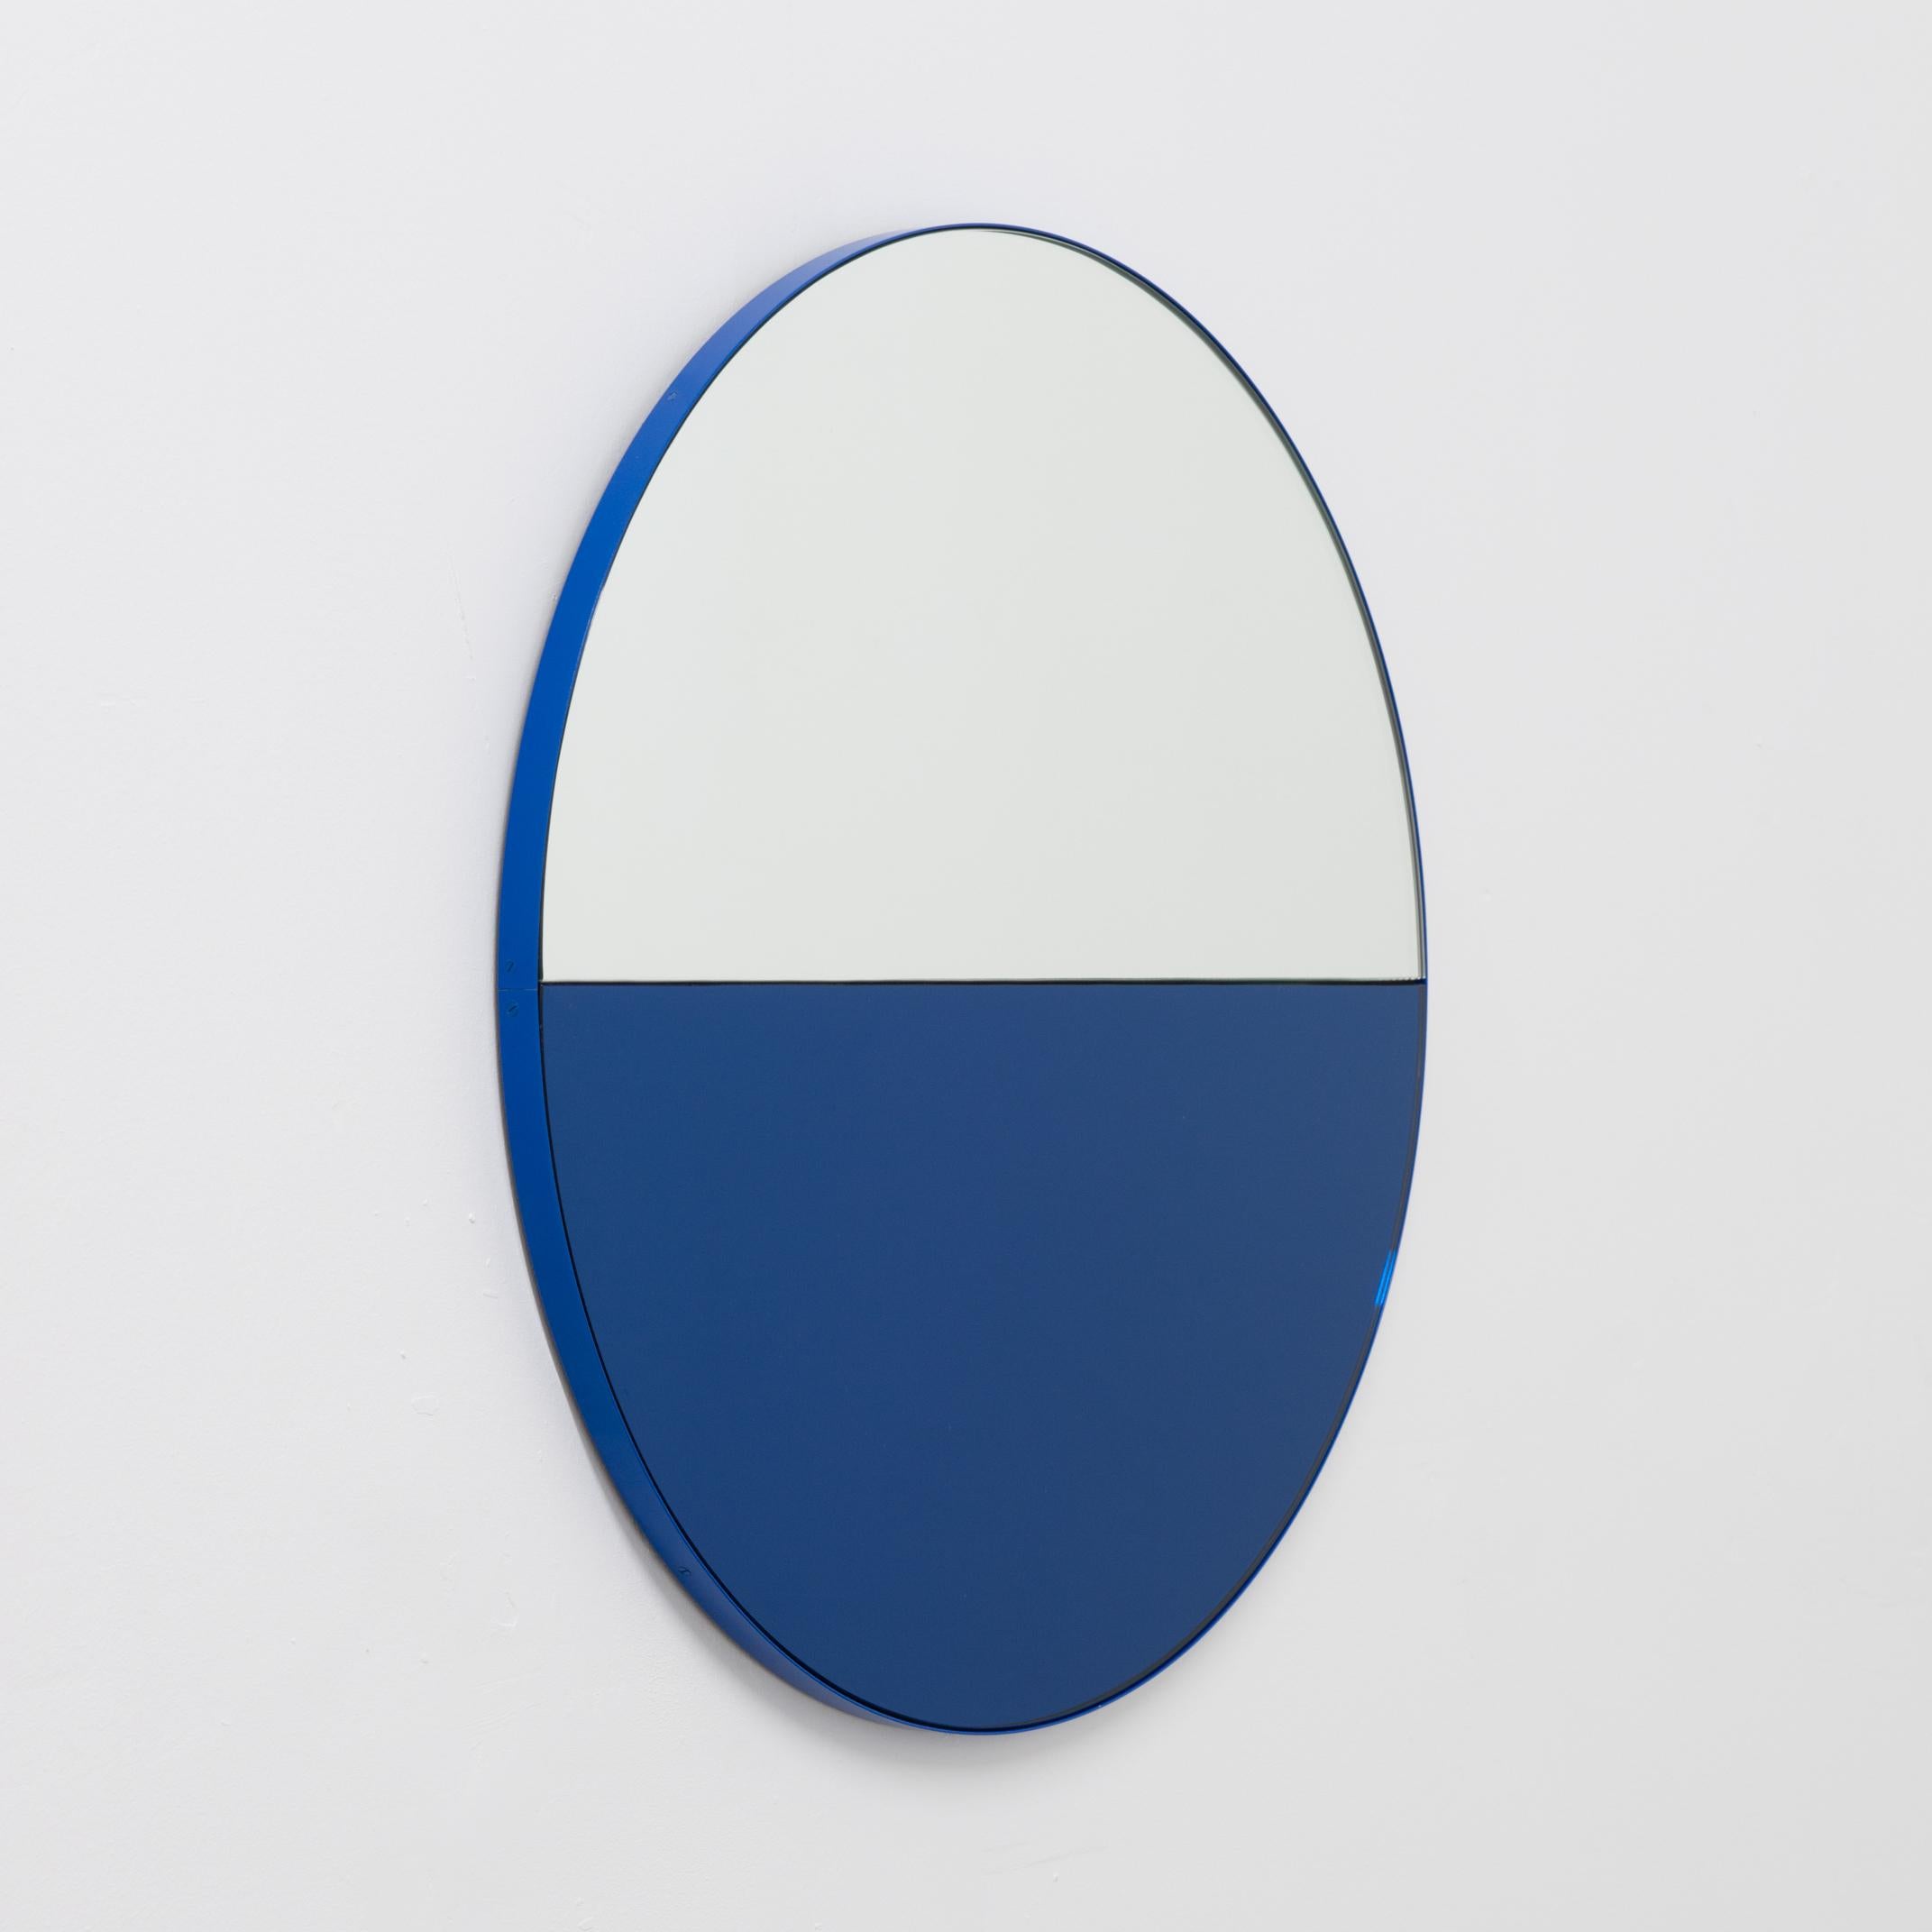 Orbis Dualis Mixed Tint Blue and Silver Round Mirror with Blue Frame, Regular In New Condition For Sale In London, GB